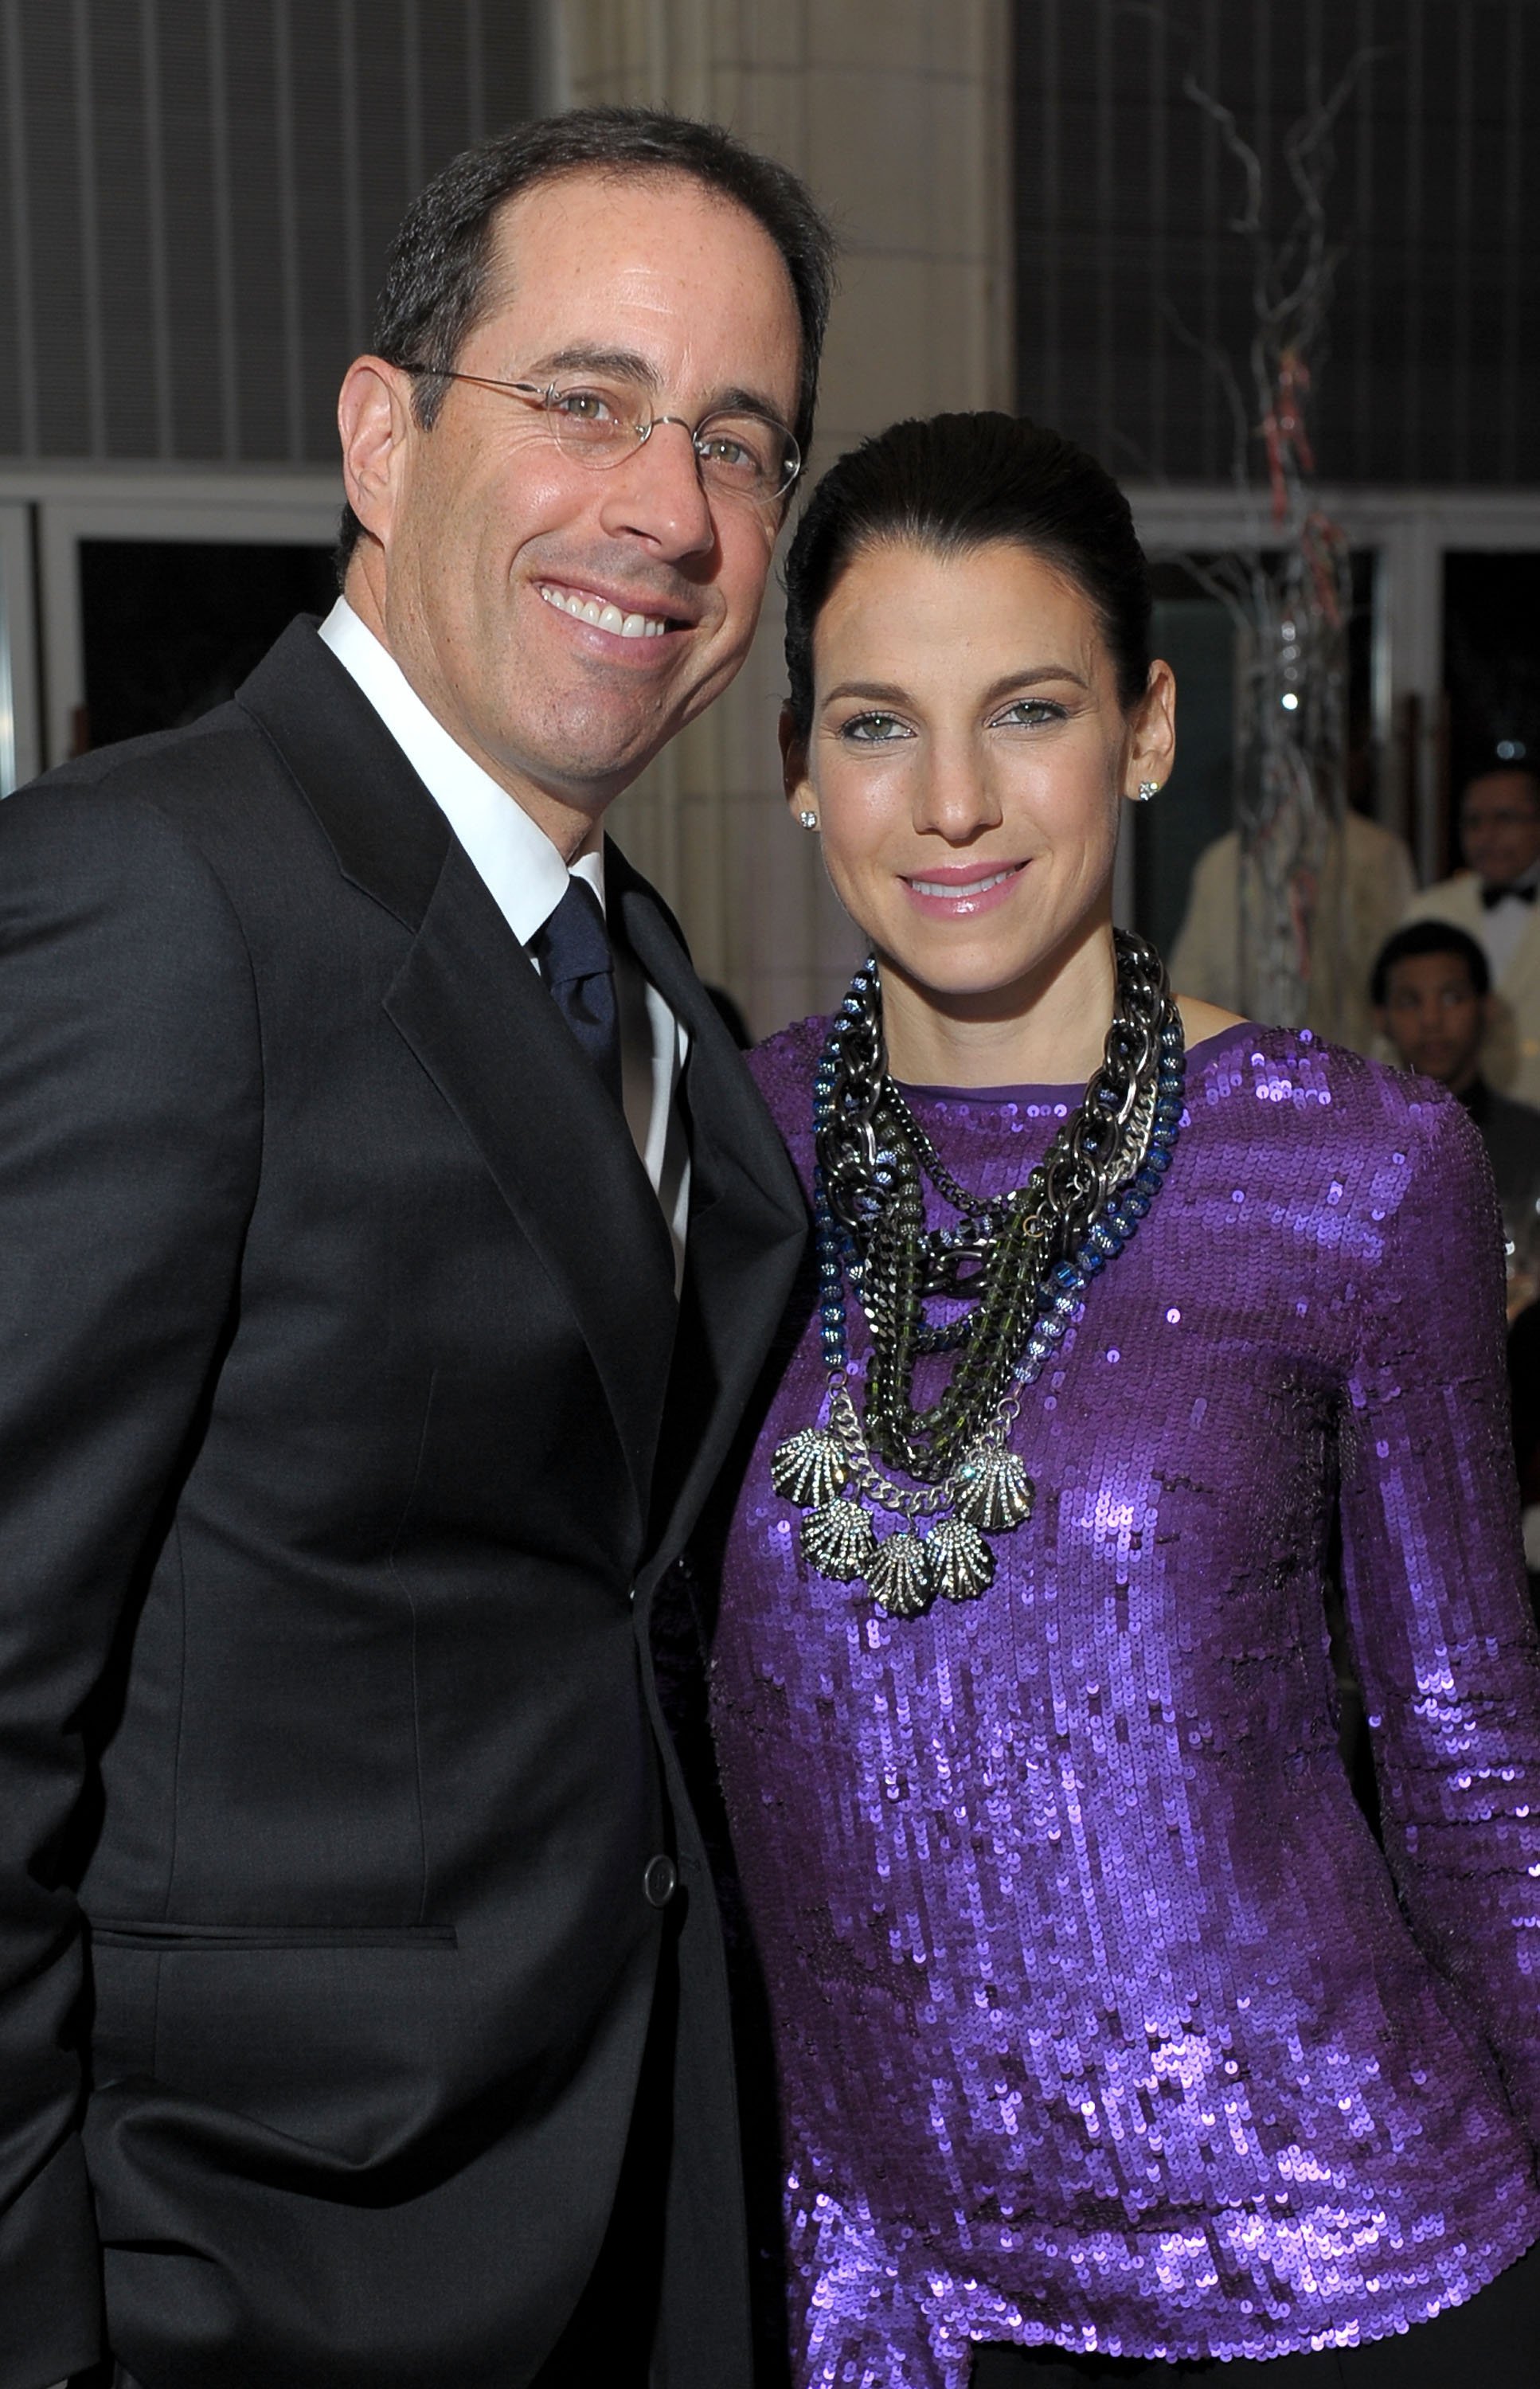 Jerry and Jessica Seinfeld. I Image: Getty Images.